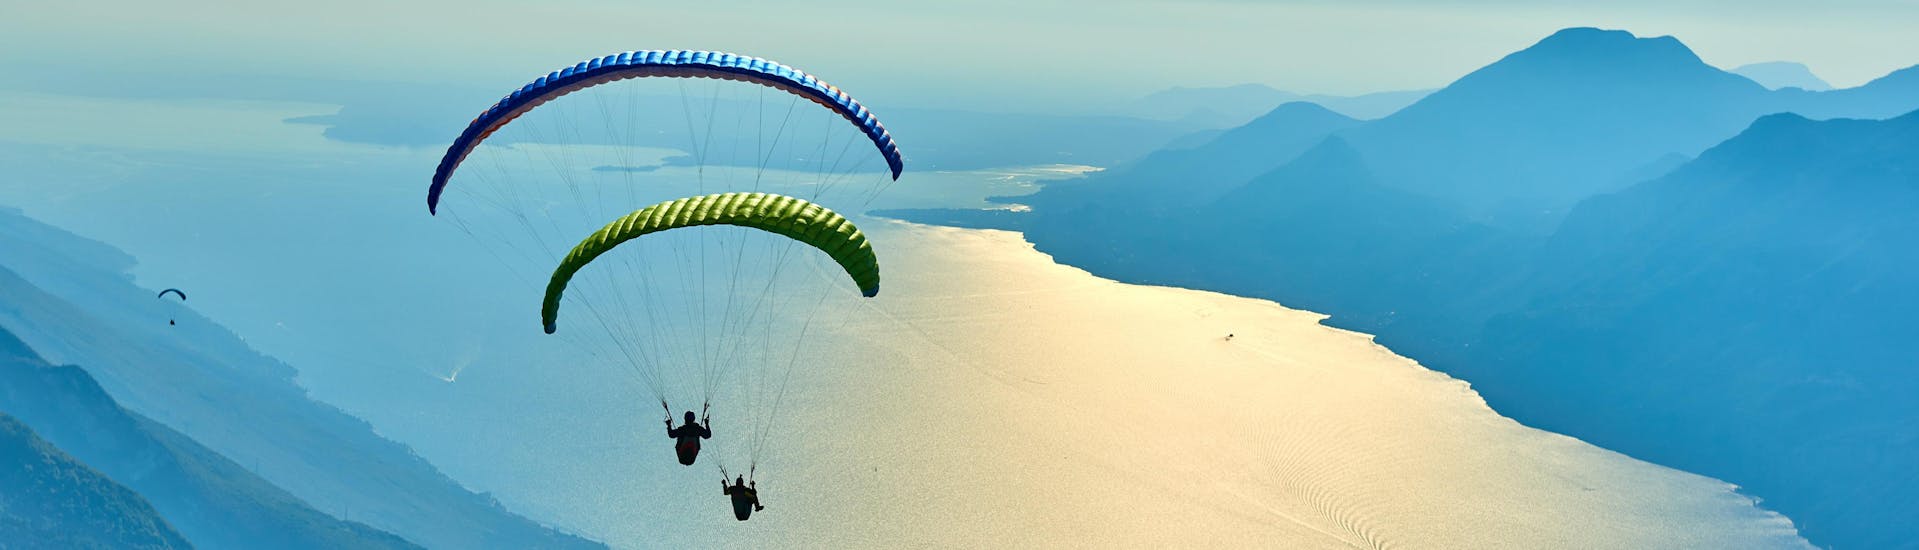 A tandem master and his passenger are sailing through cloudy skies while paragliding in Malcesine.